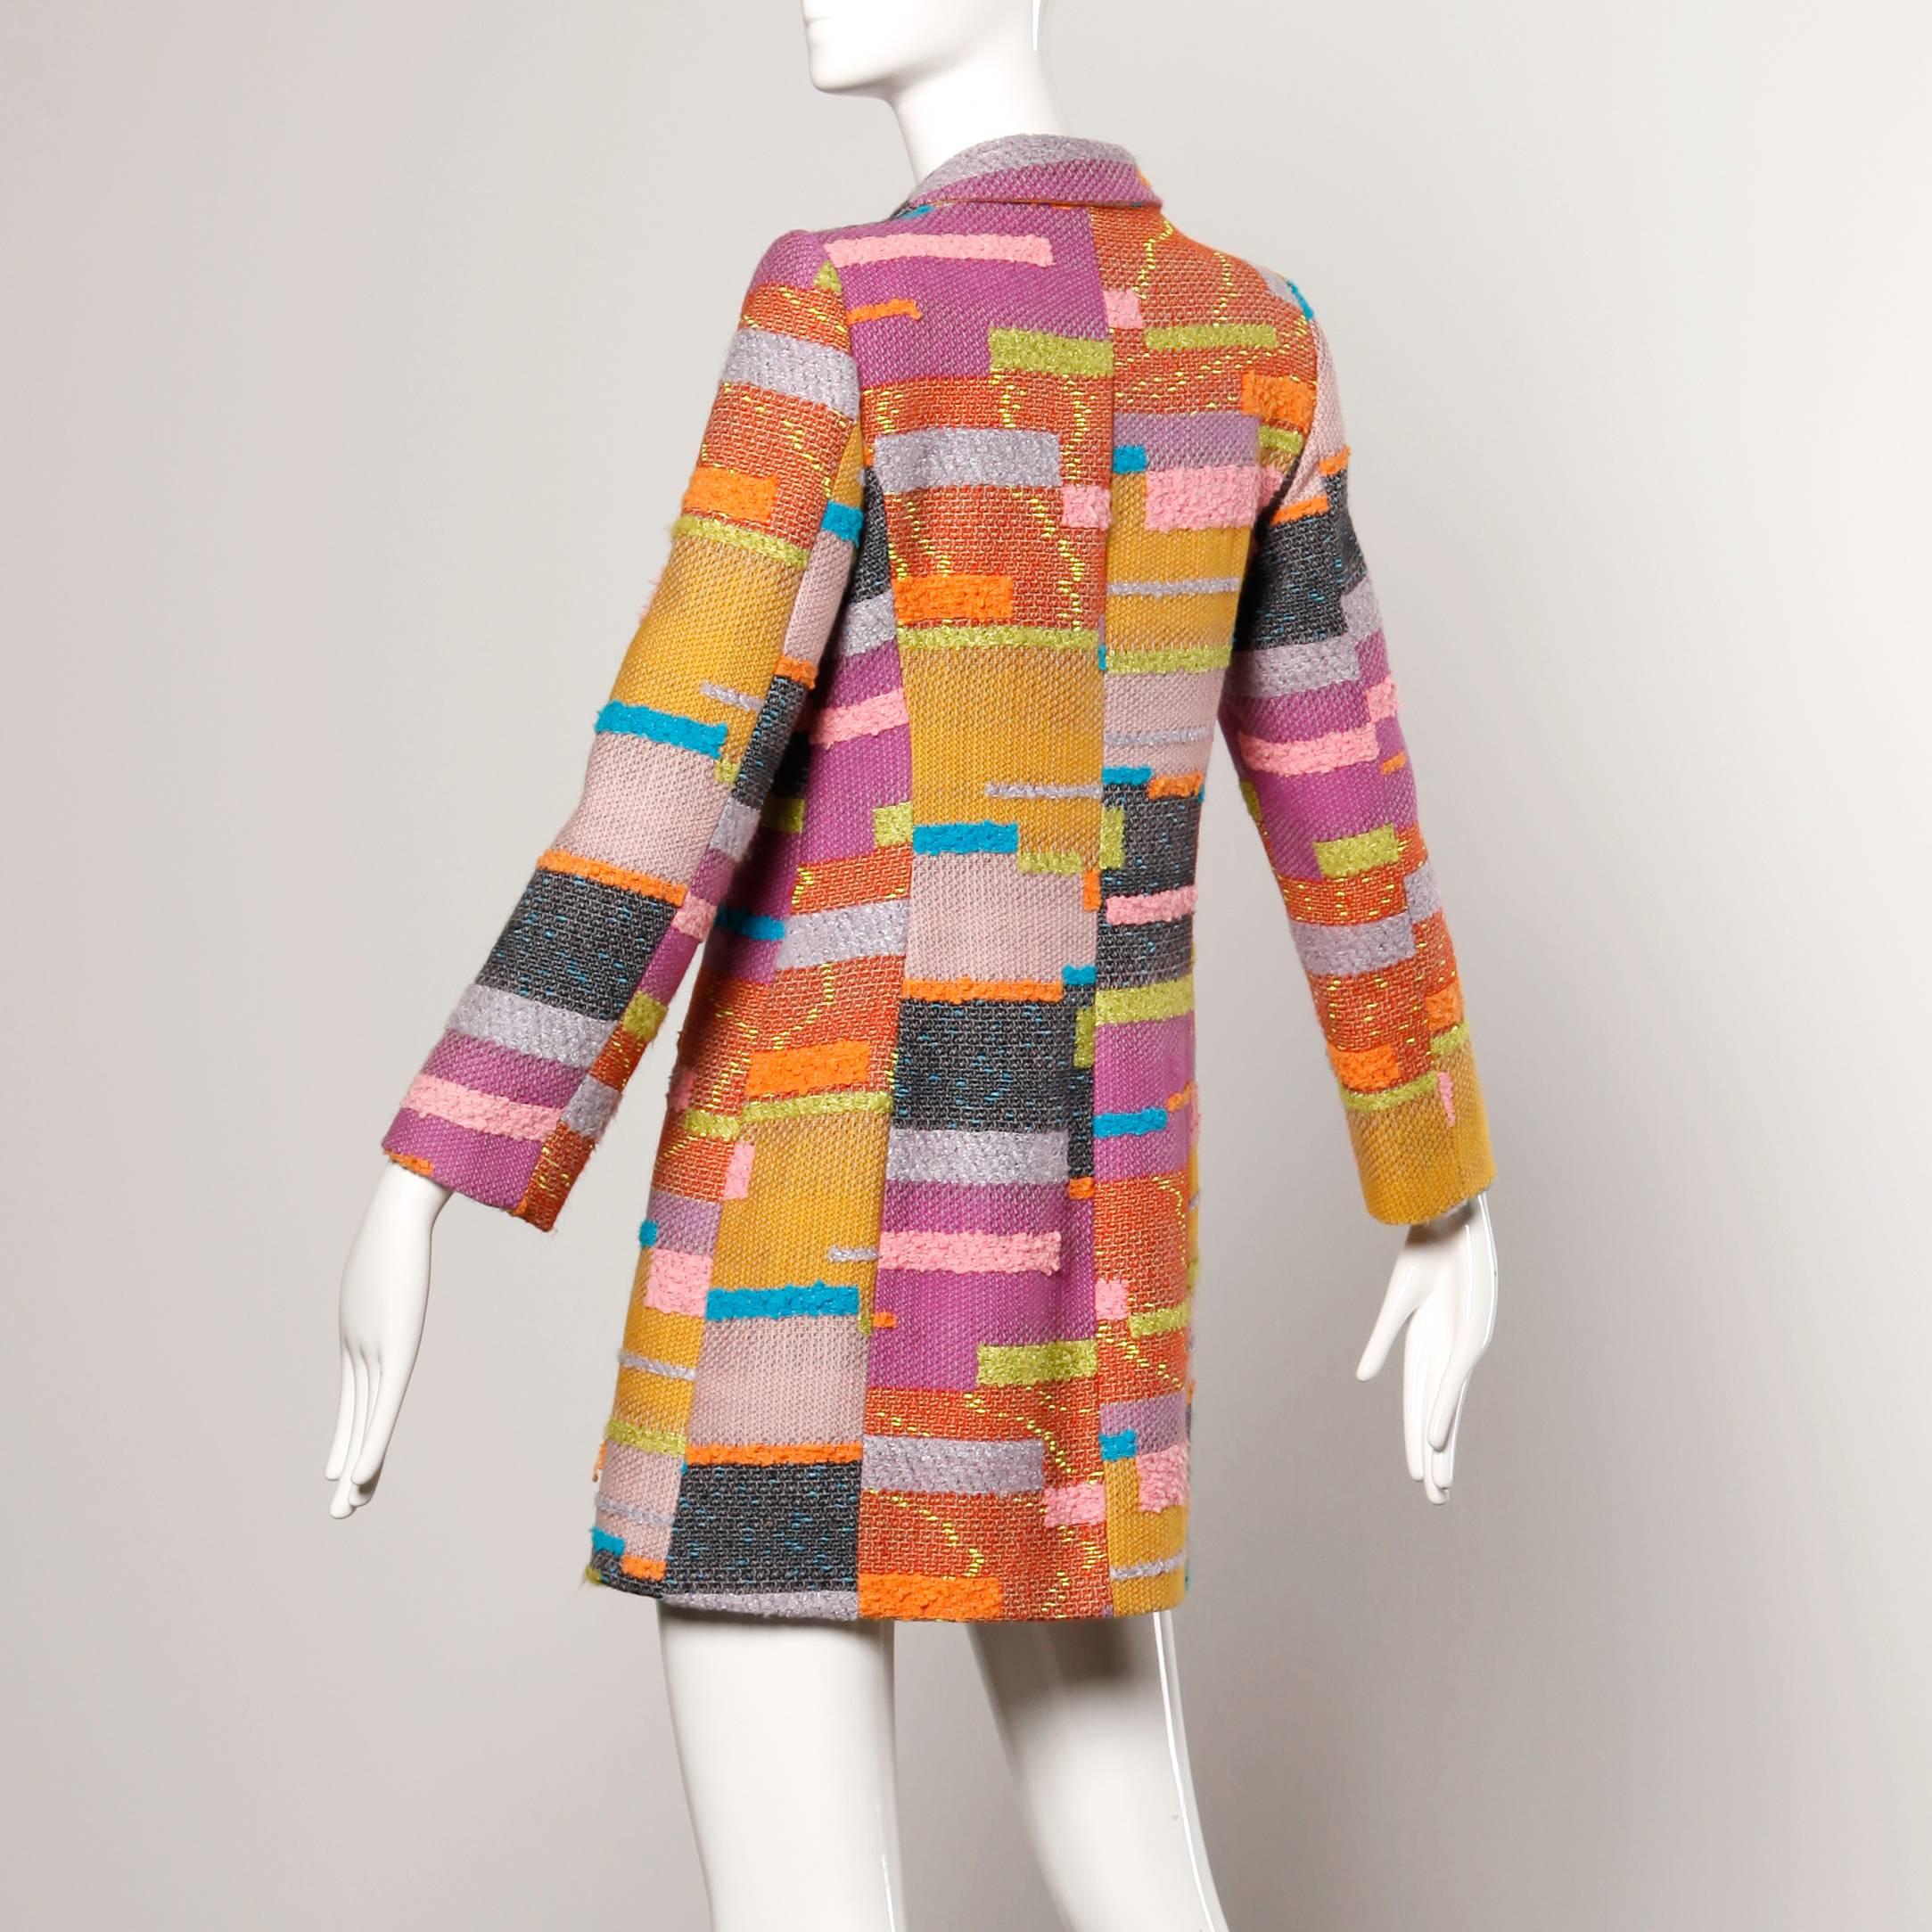 Light weight color block coat by Christian LaCroix in colorful woven fabric. Fully lined. Front button closure. Fabric content is 73% wool, 15% cotton, 8% rayon, 4% poly. Made in France. Marked size 38. Fits like a modern size small-medium. The